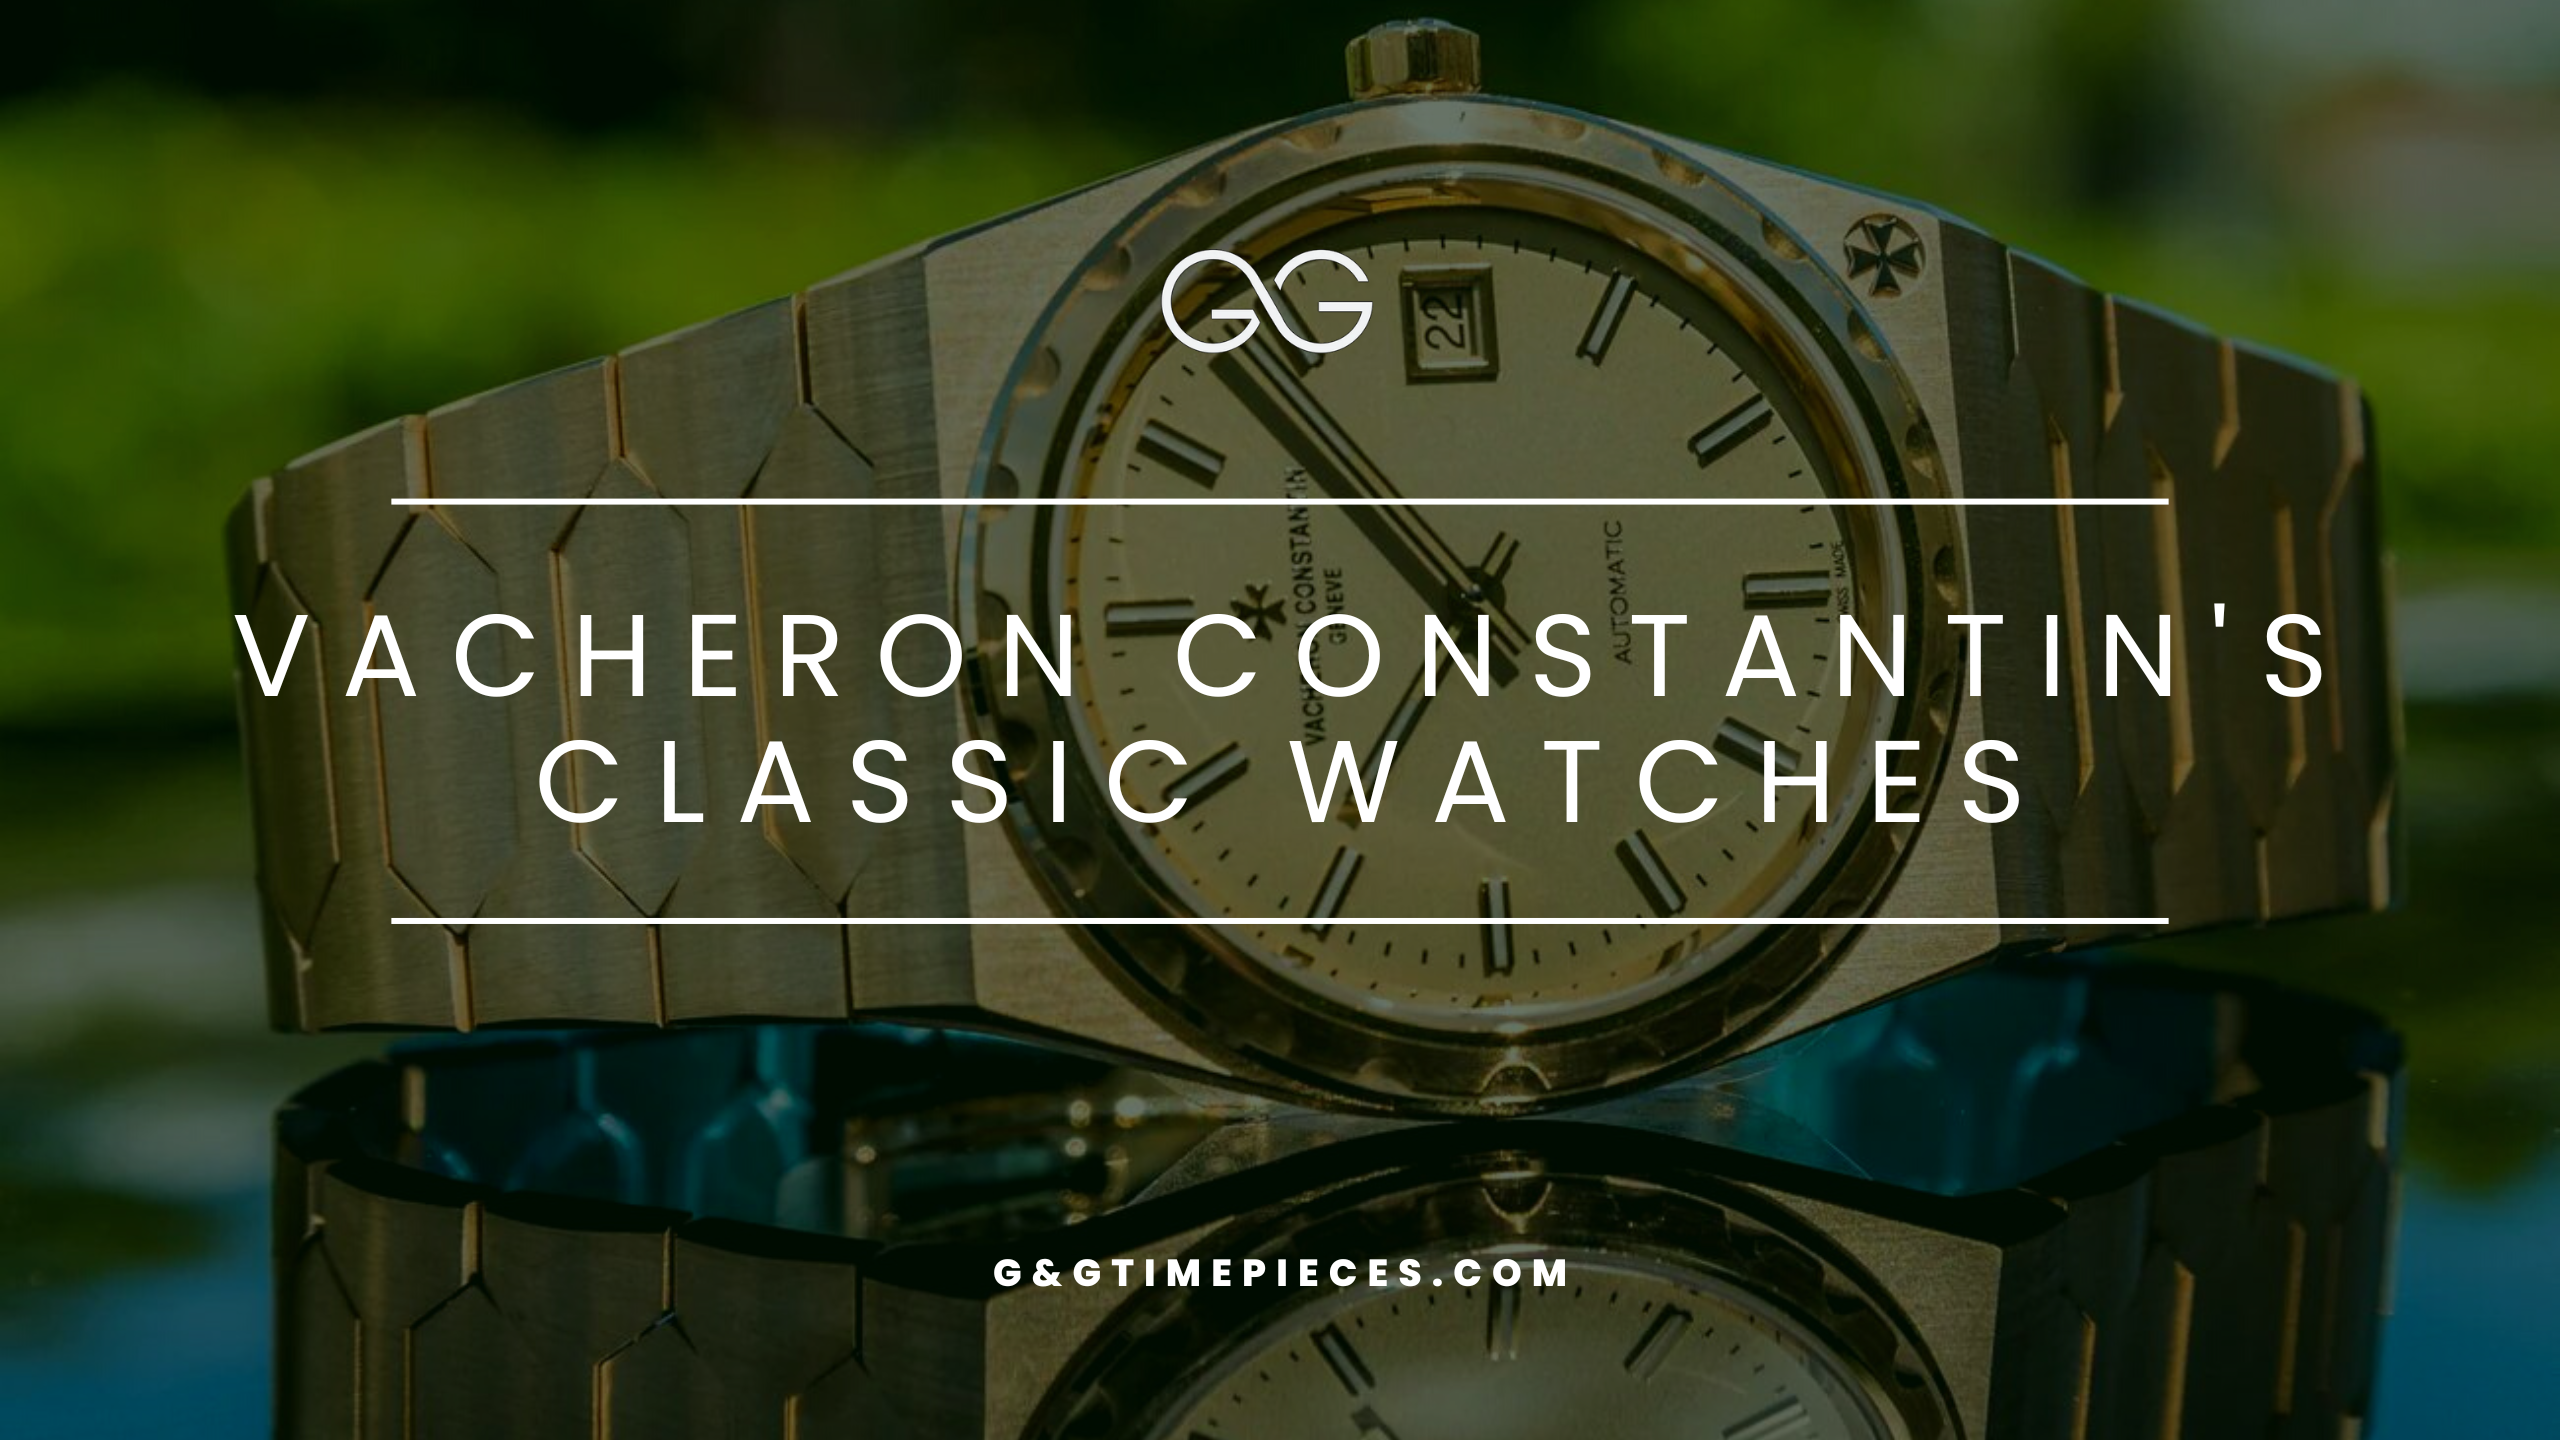 A Guide to Vacheron Constantin's Classic Watches